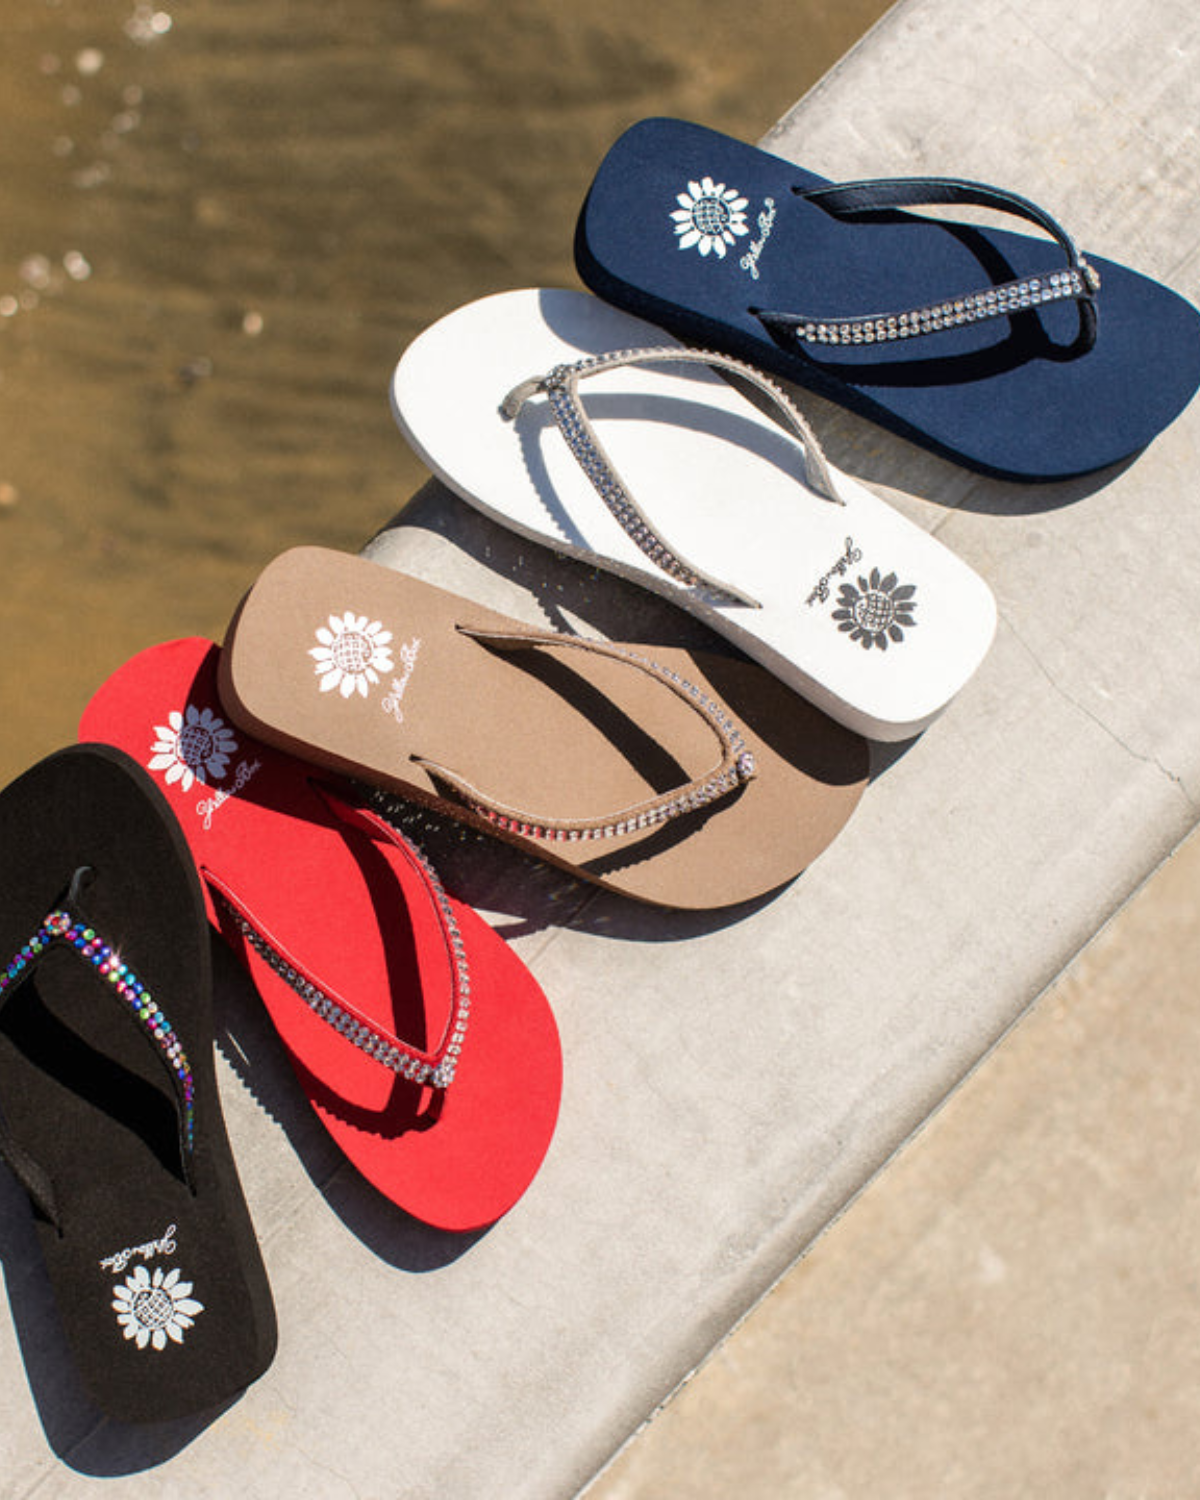 A group of women's multi colored wedge sandals with rhinestones on the strap. From left to right it shows black, red, taupe, white and navy.